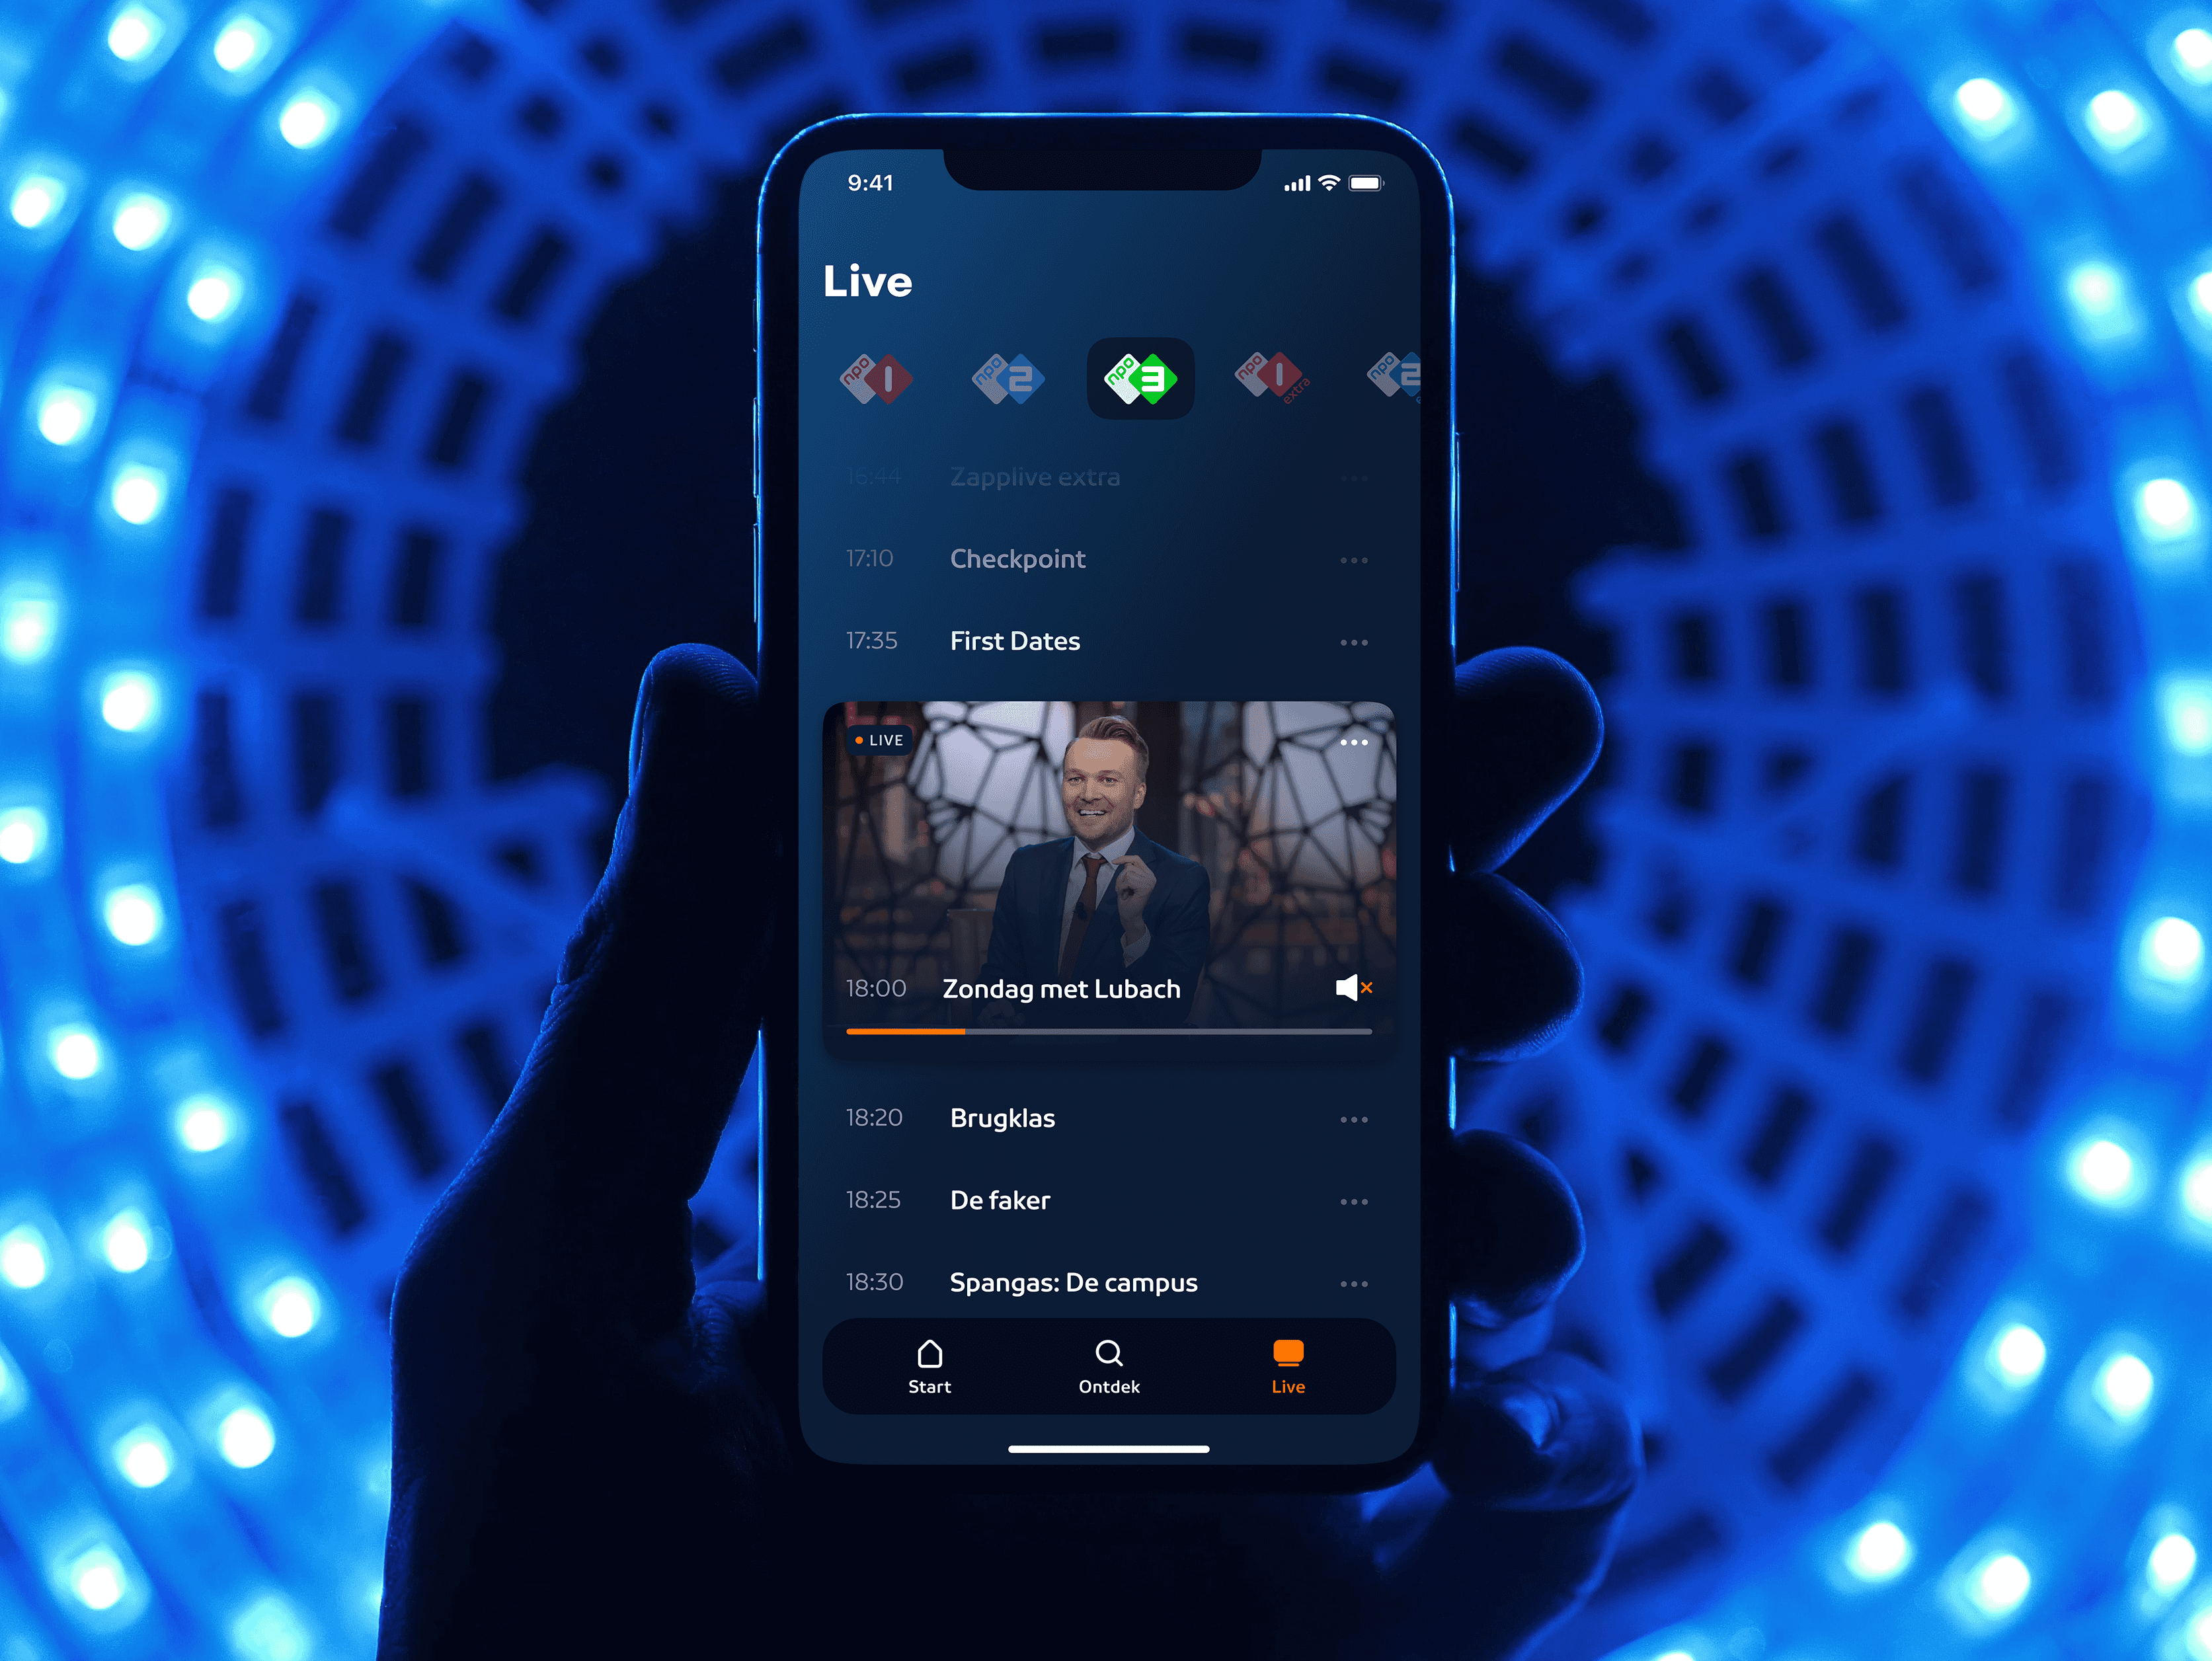 A new concept and app design